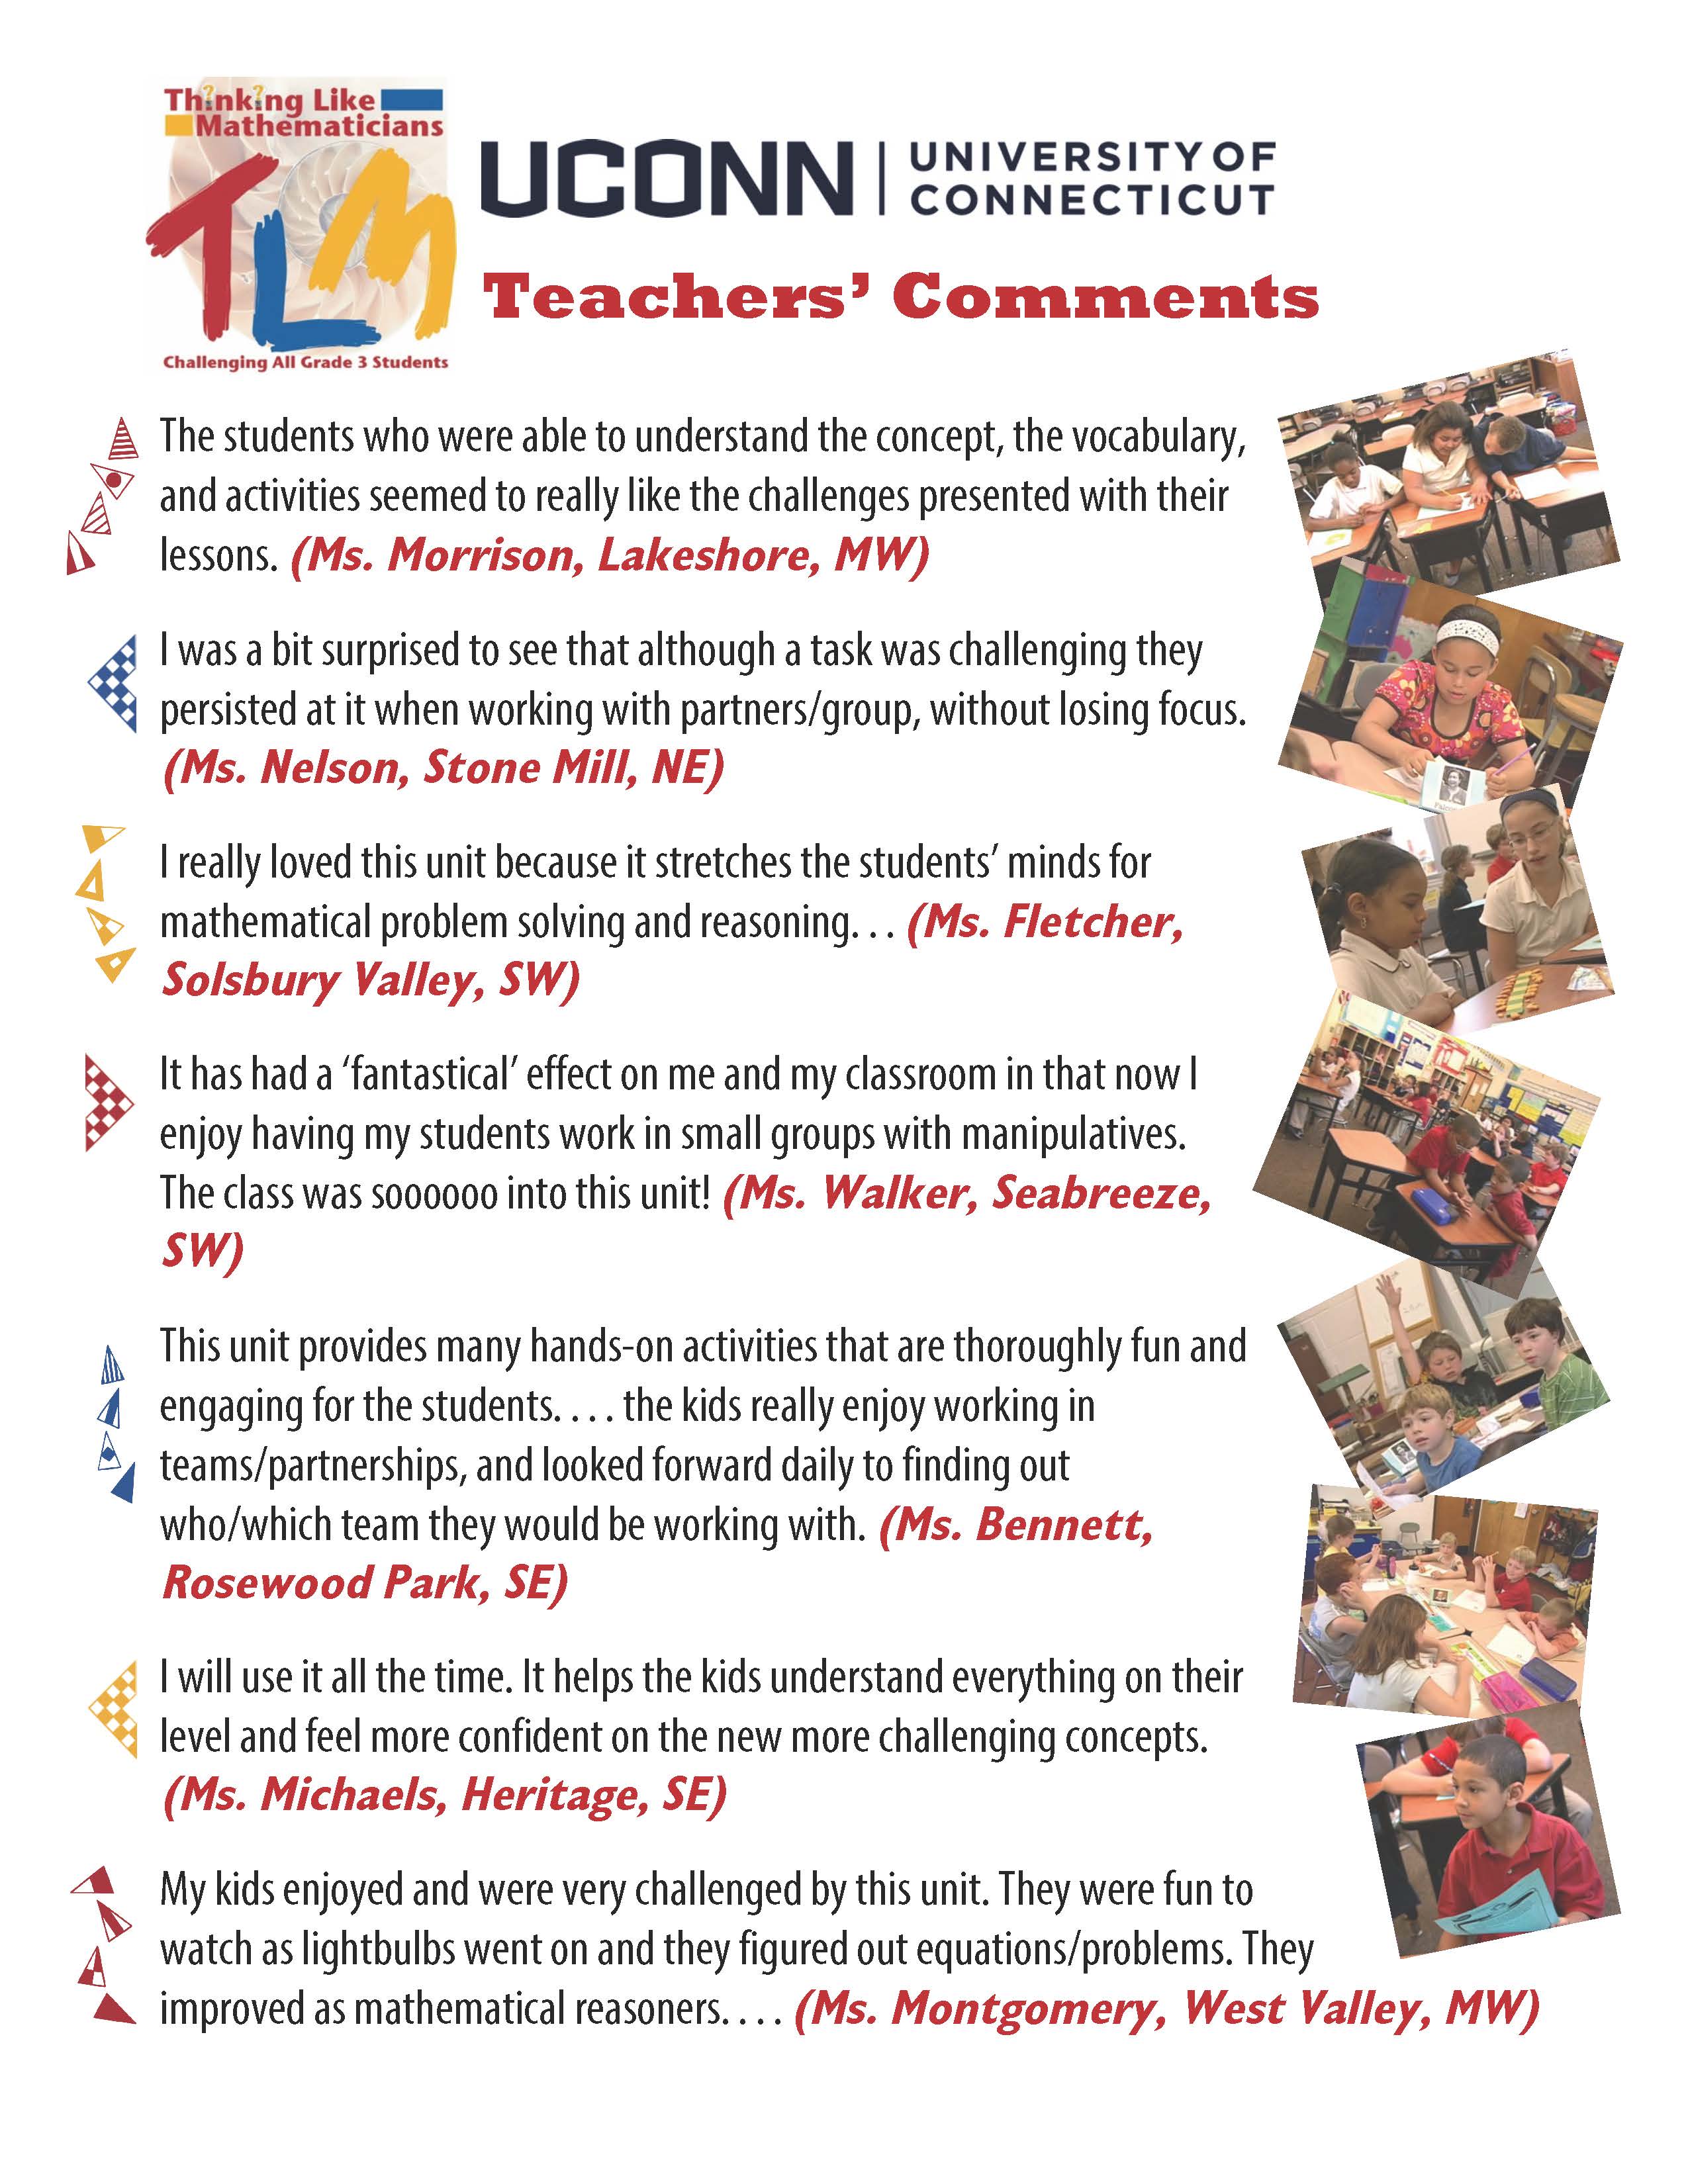 Comments From Seven Teachers